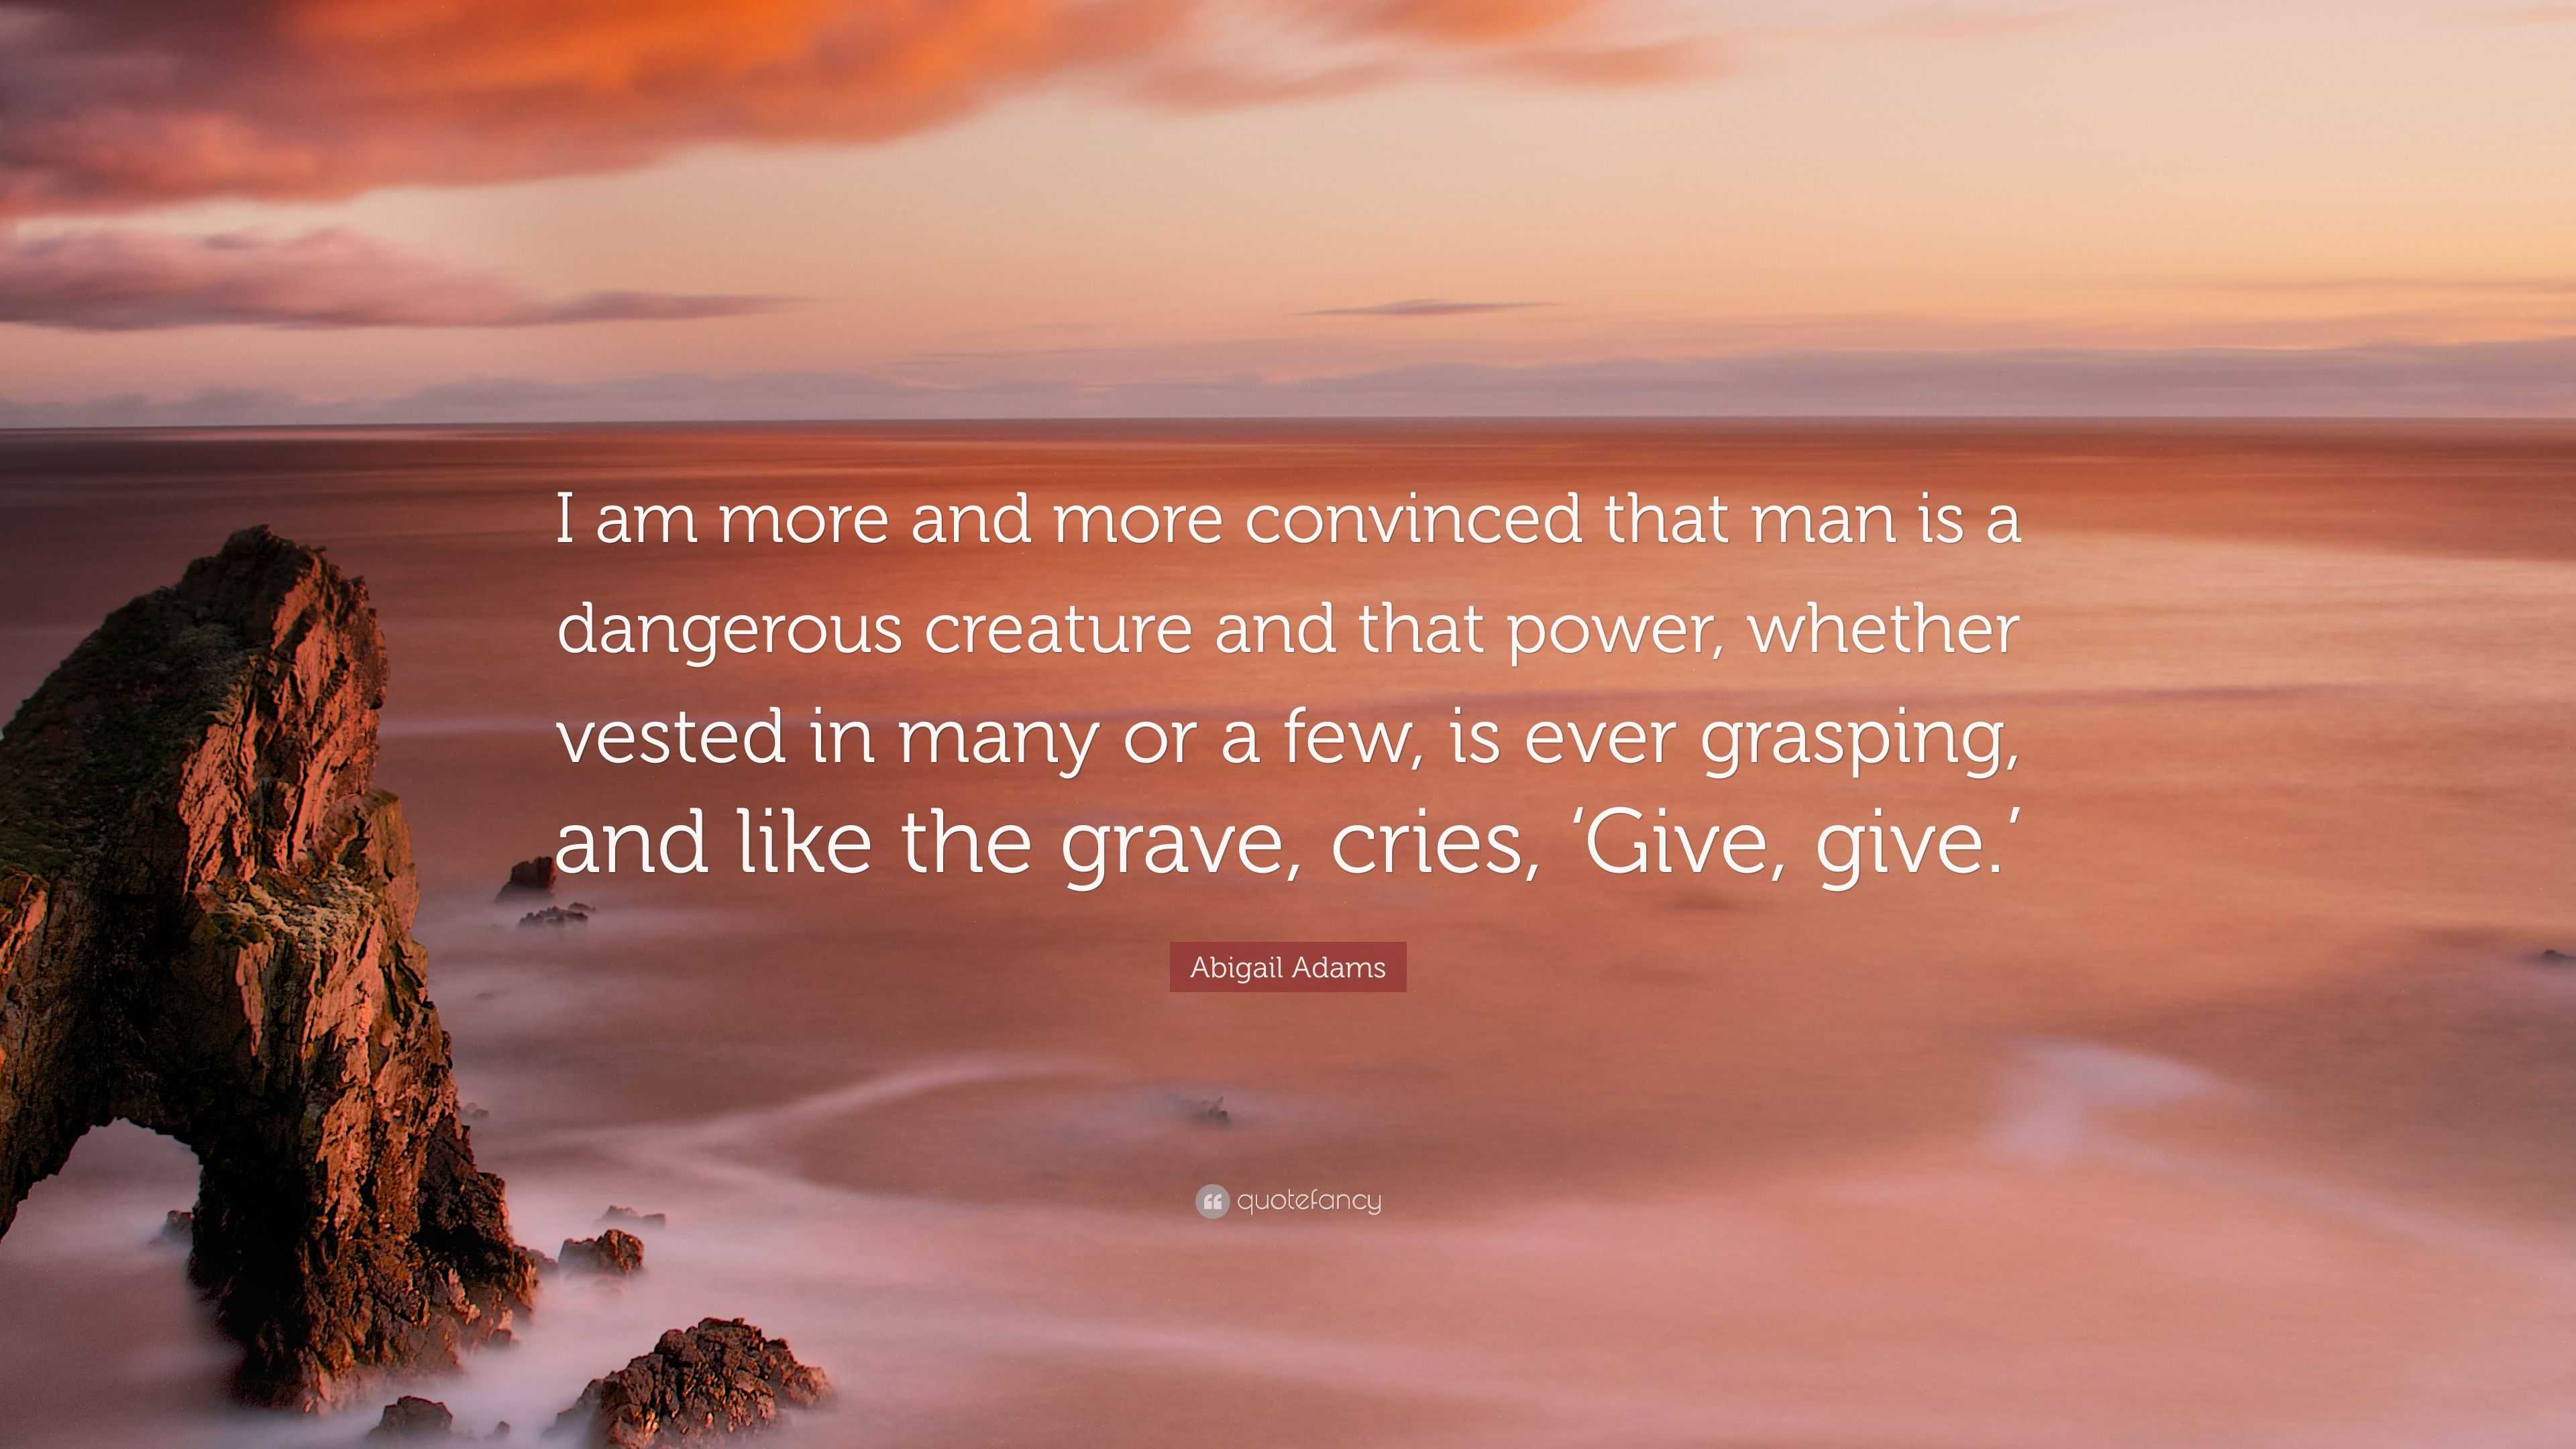 Abigail Adams Quote “I am more and more convinced that man is a